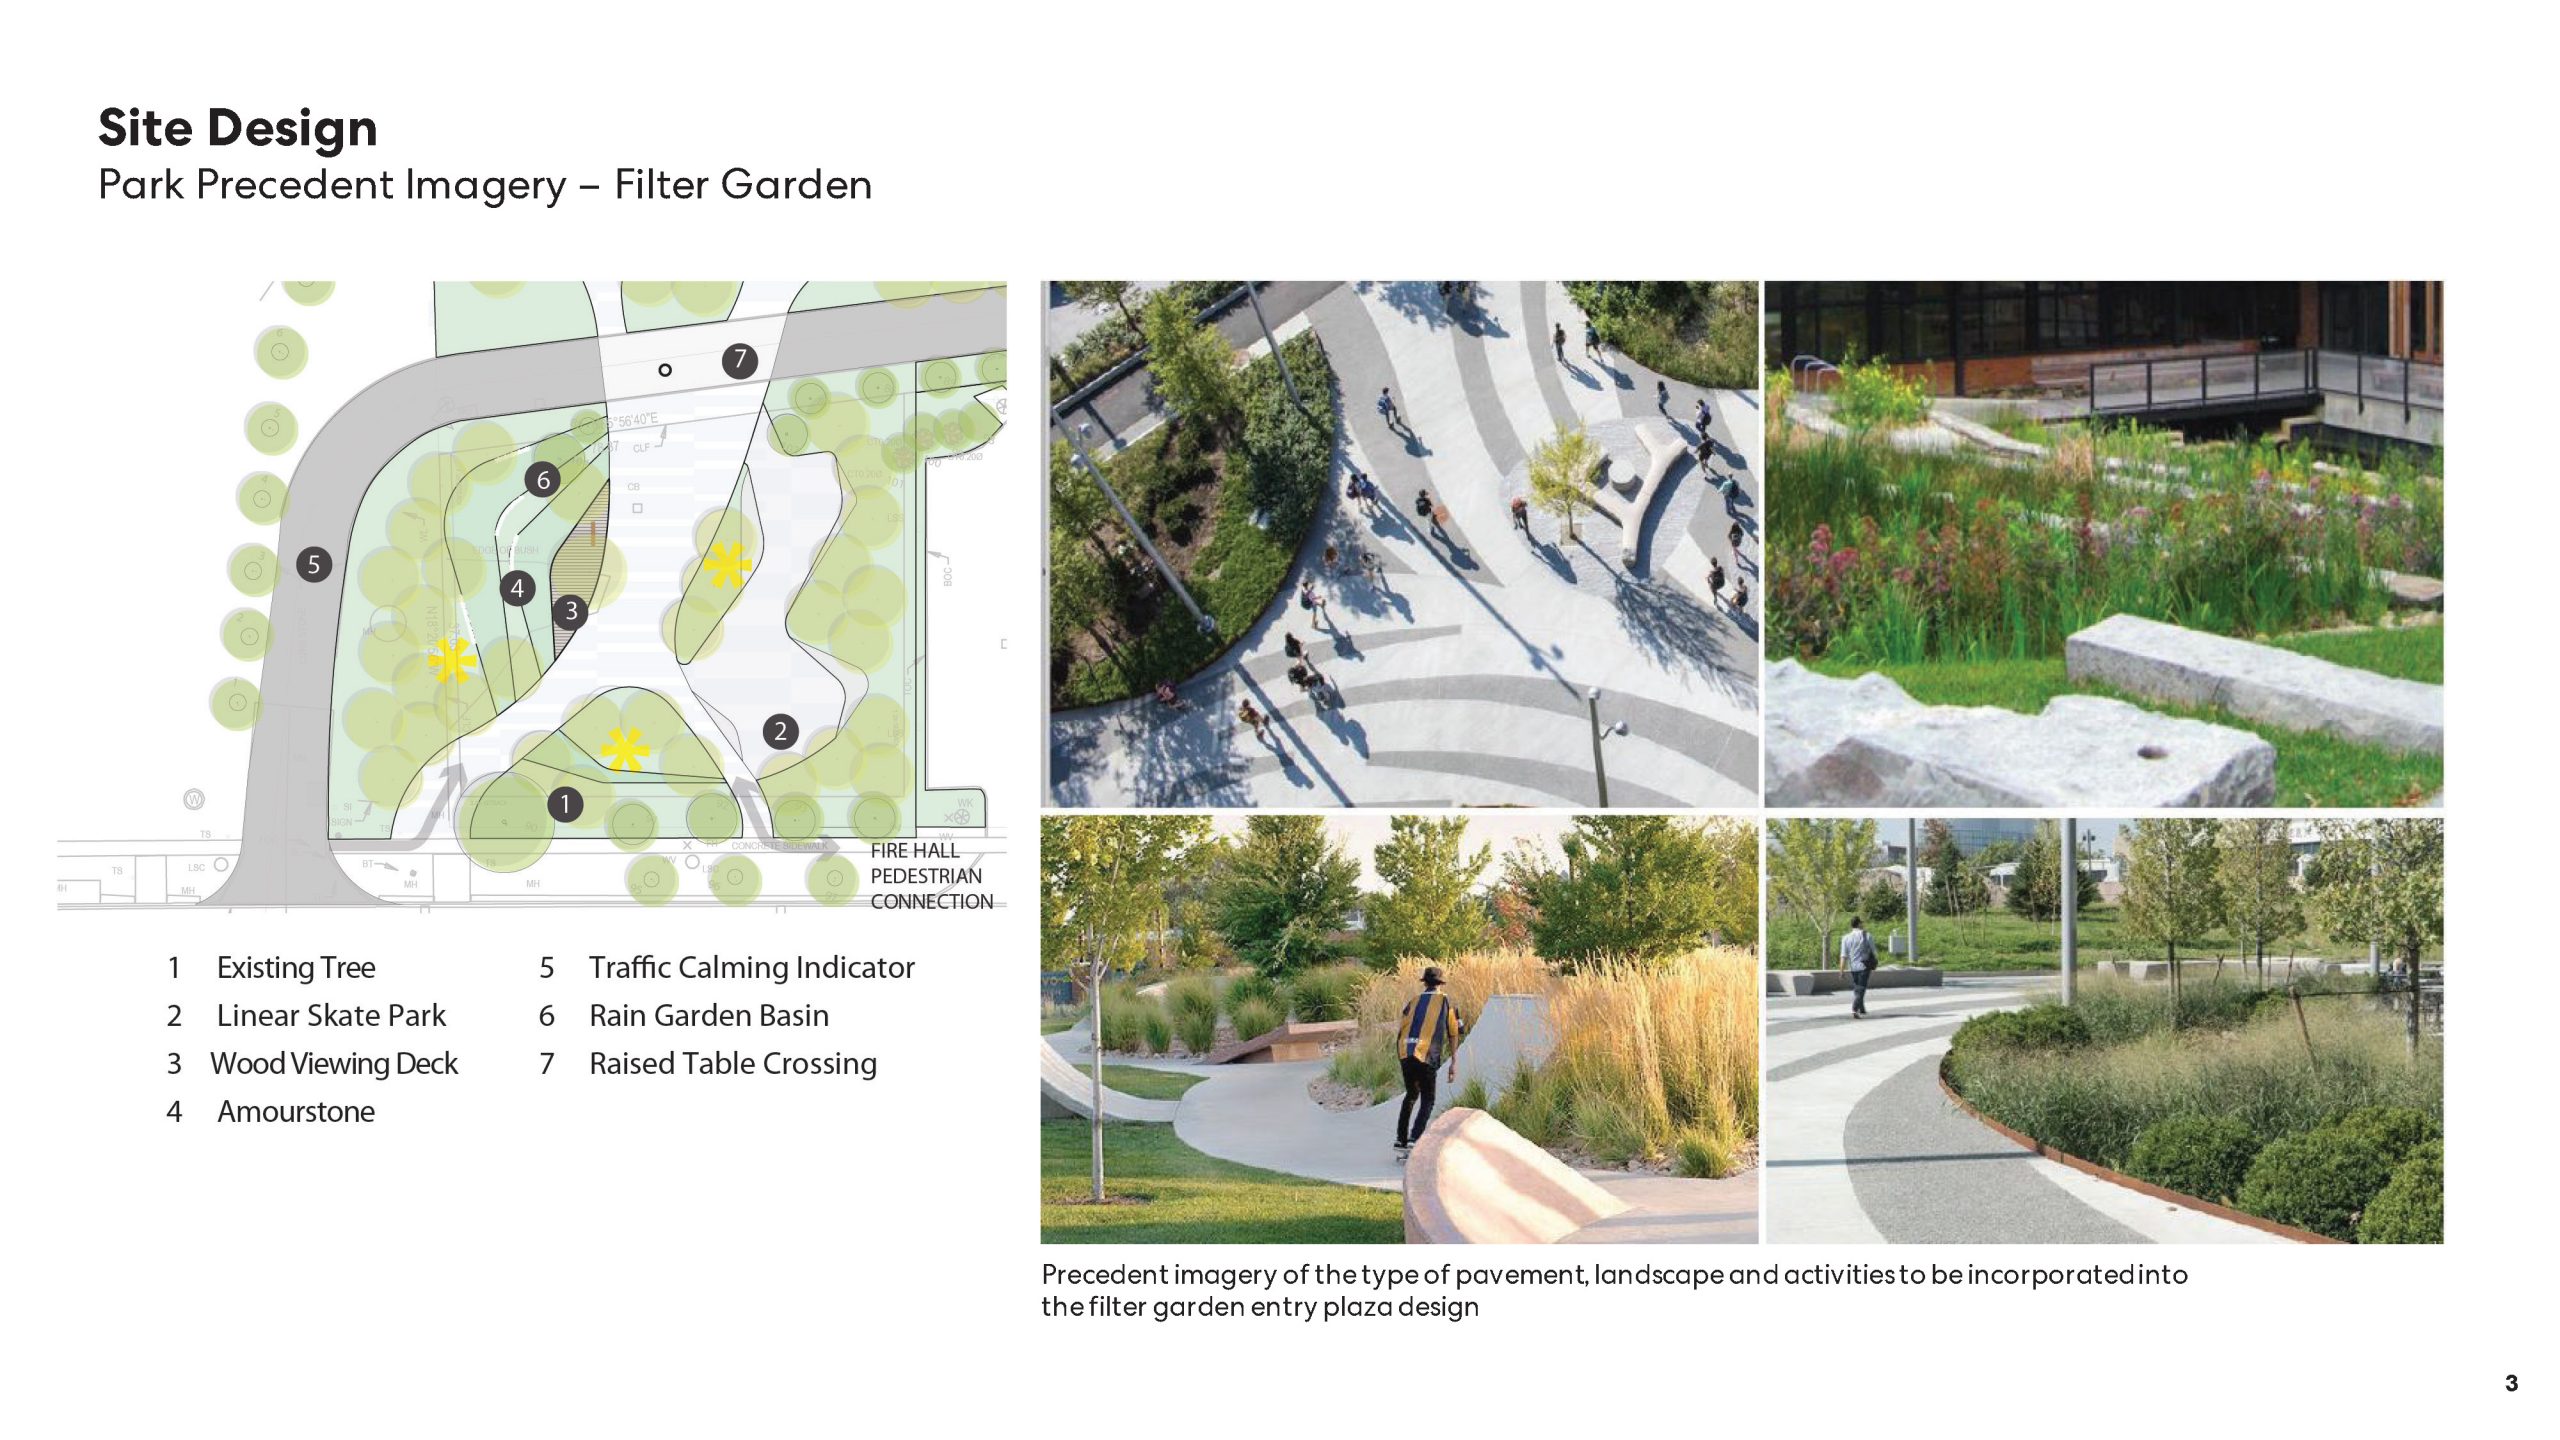 Precedent imagery of the type of pavement, landscape and activities to be incorporated in to the garden entry plaza design